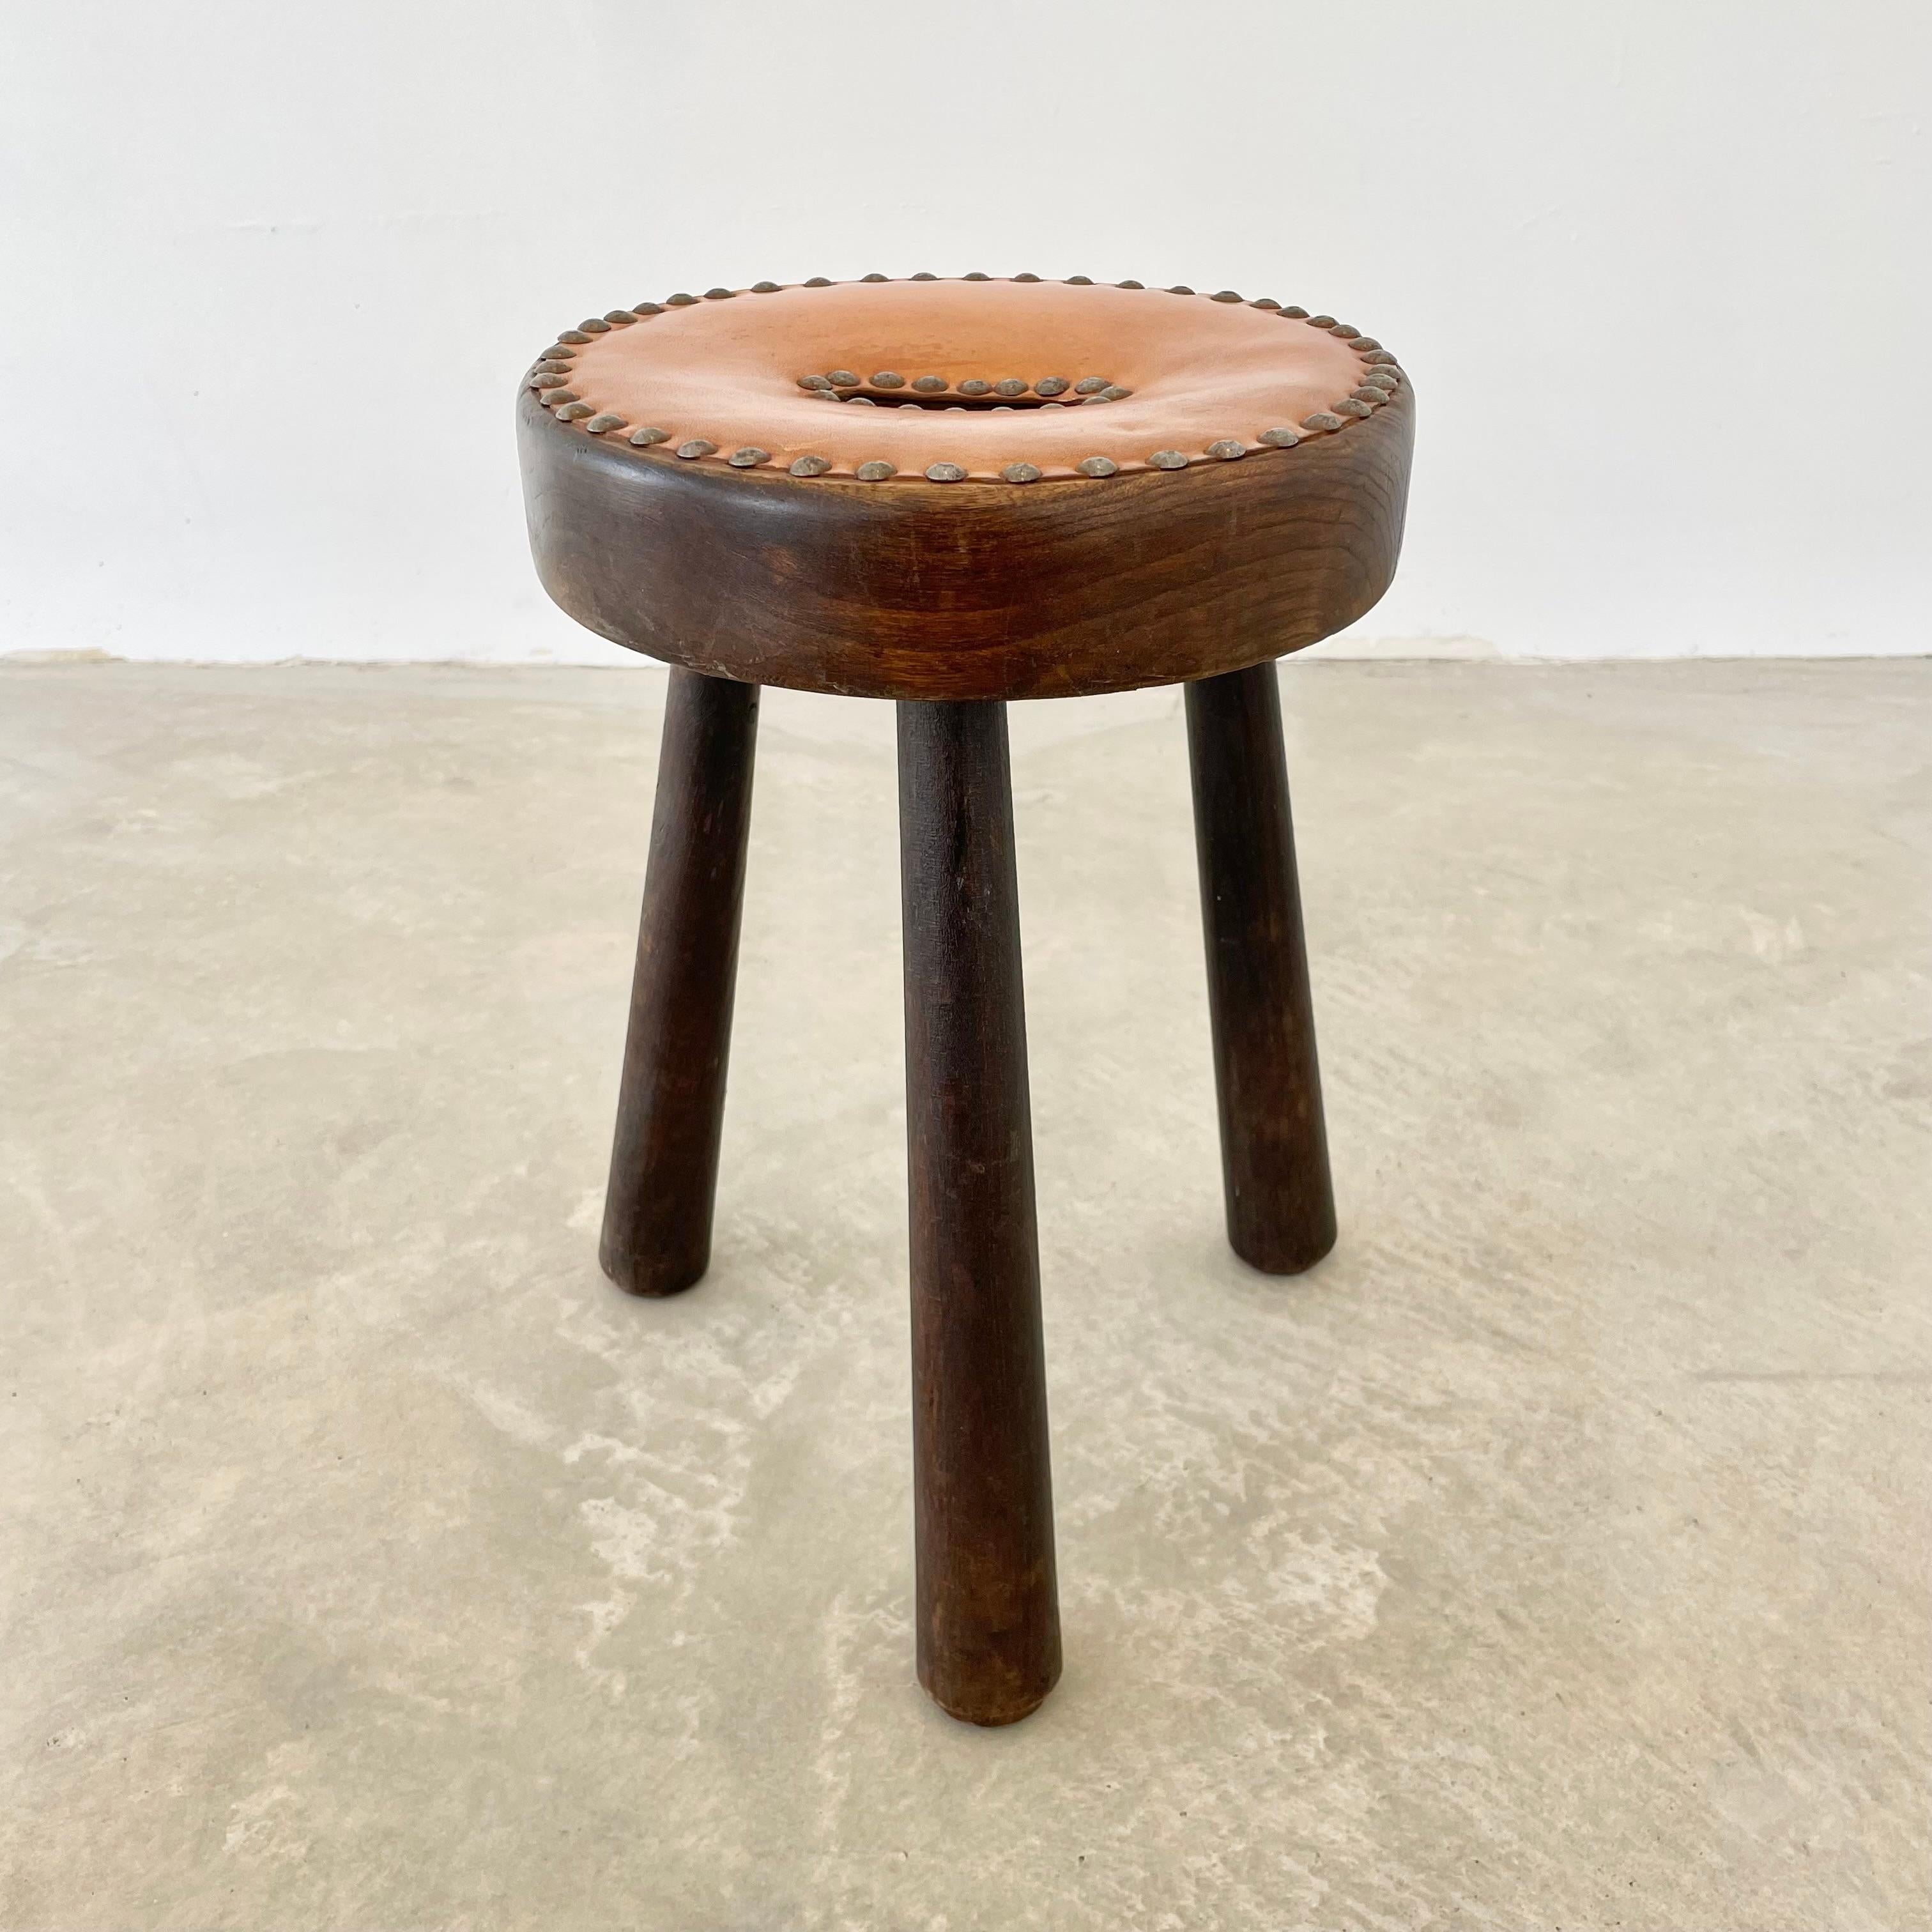 Unique tripod stool made in France, circa 1970s. Substantial and chunky round seat with three sturdy club legs that taper out at the bottom. Seat is covered with a thick piece of leather that is studded into the wood with metal studs all around its